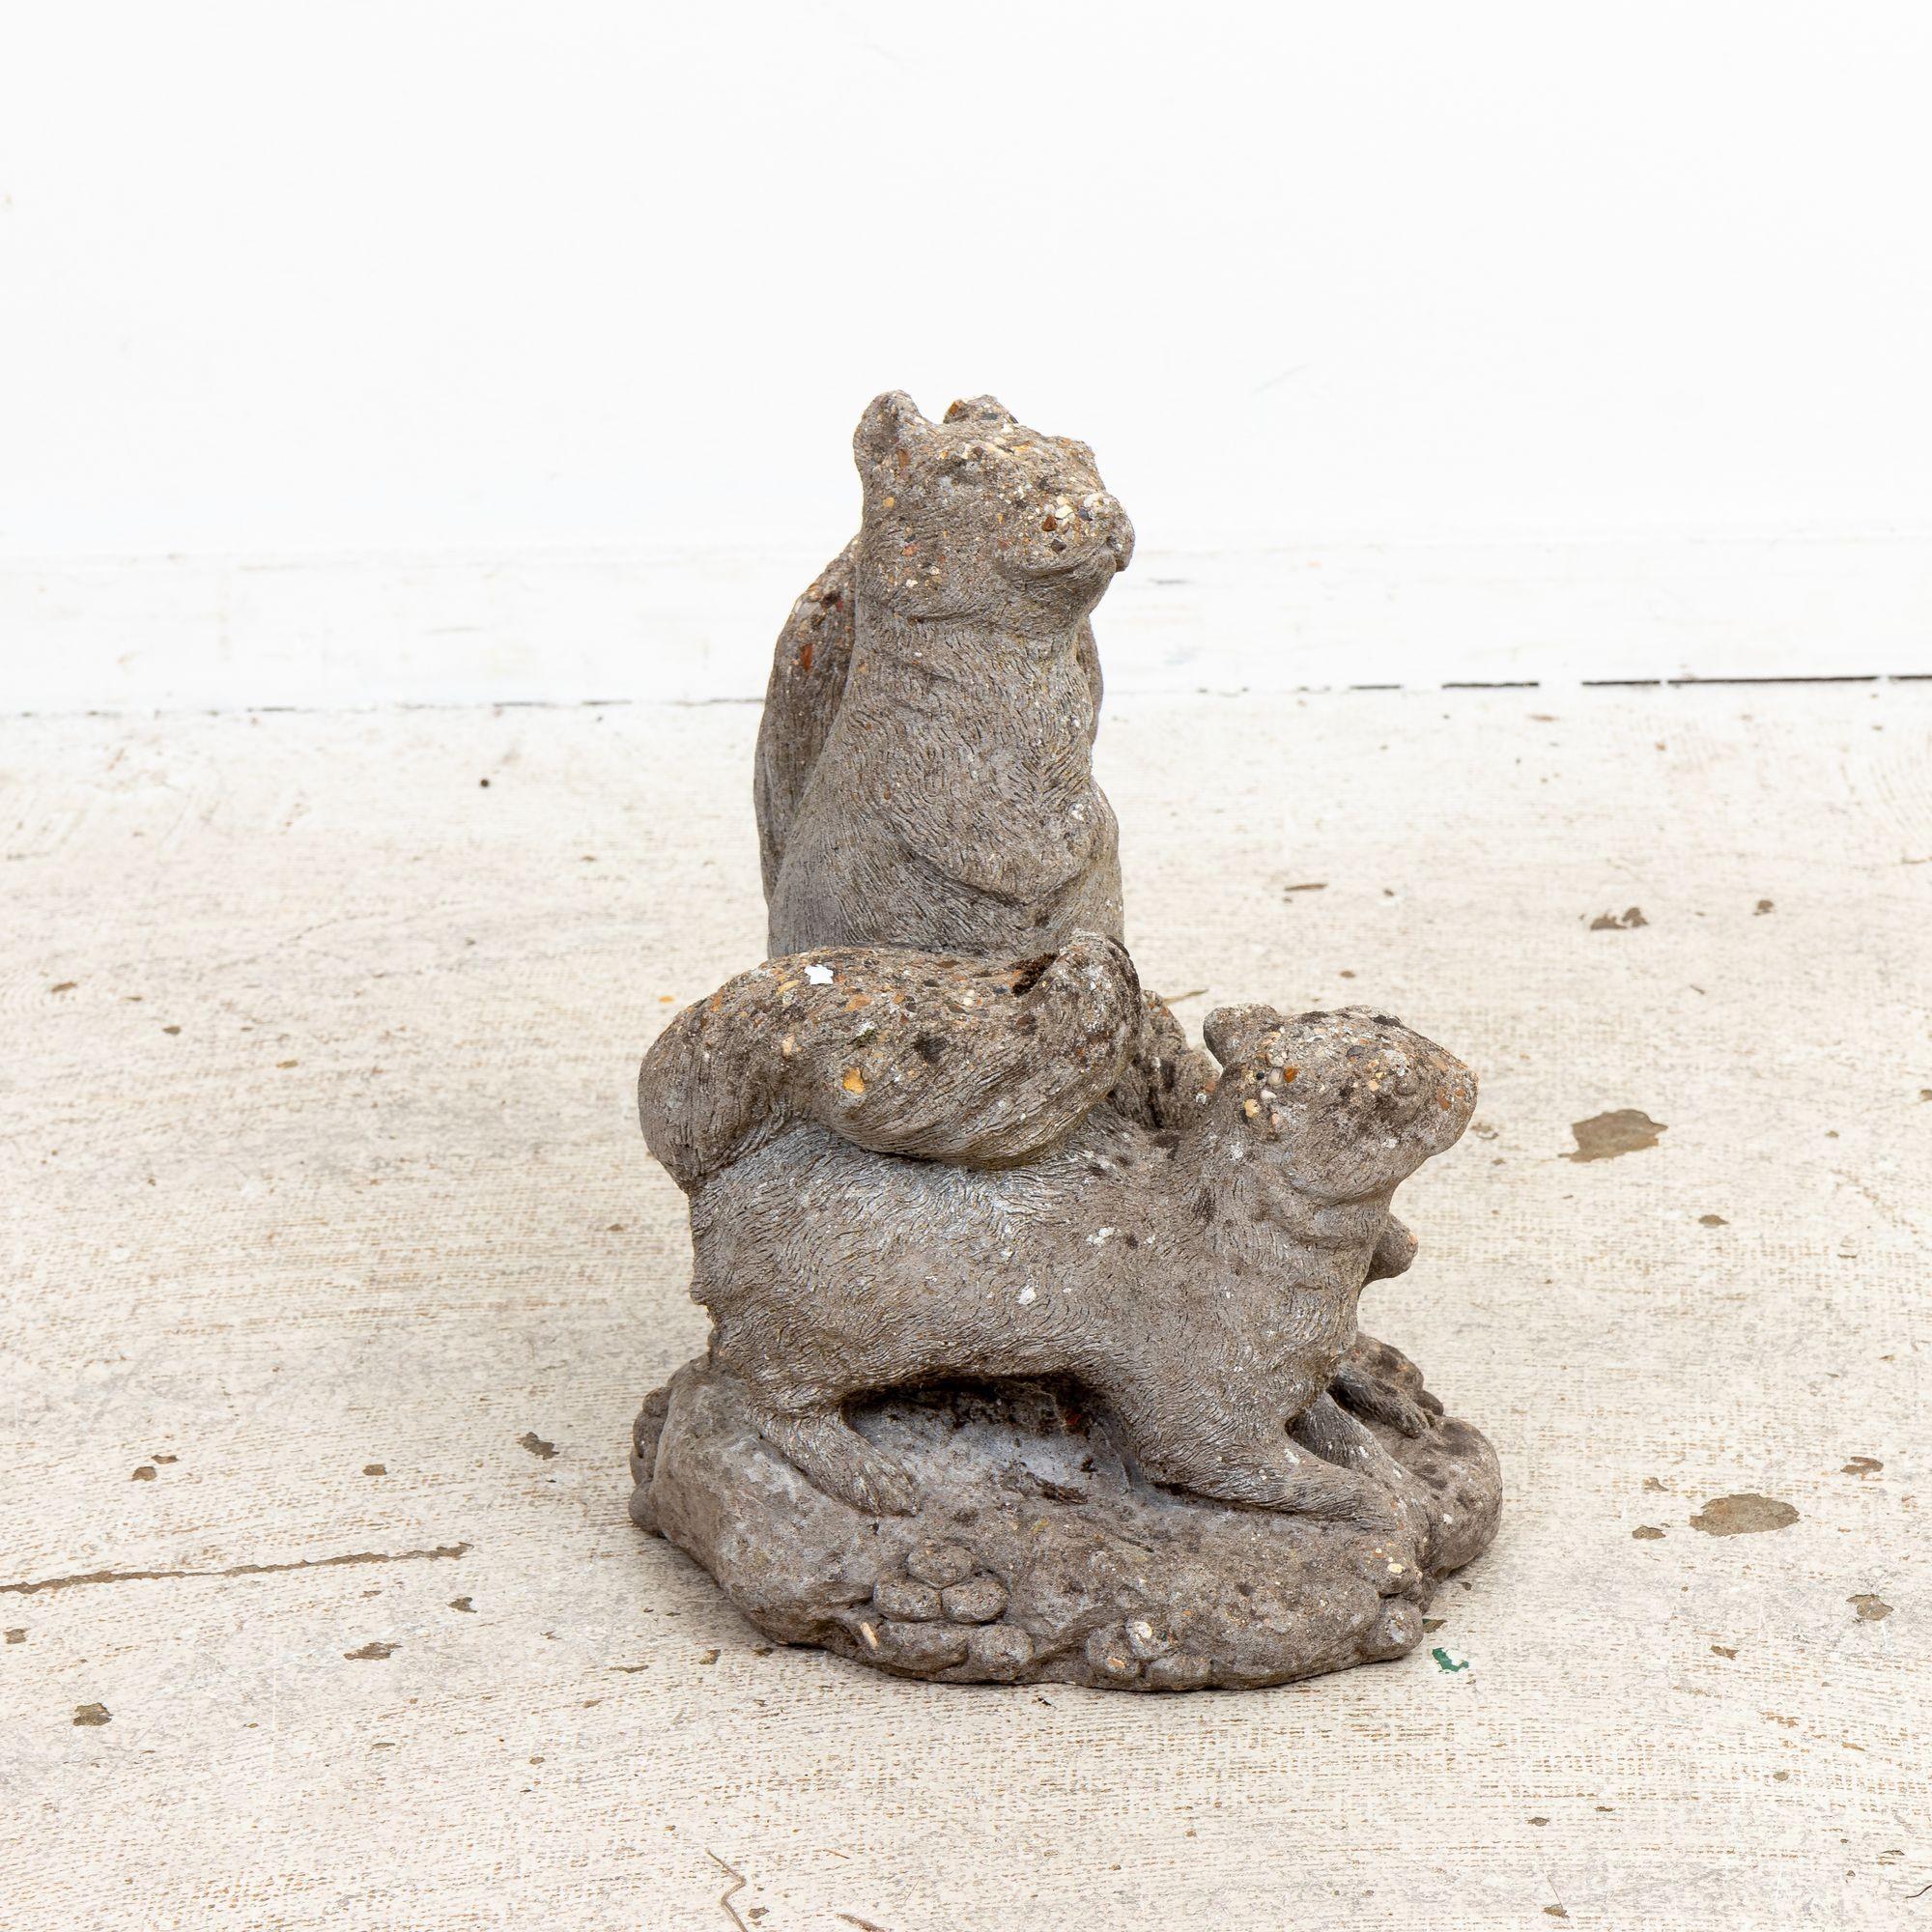 This remarkable mid-20th century Belgian garden ornament captures the essence of a playful family of squirrels. Meticulously crafted from durable concrete, these lifelike sculptures showcase intricate details, from the bushy tails that seem ready to